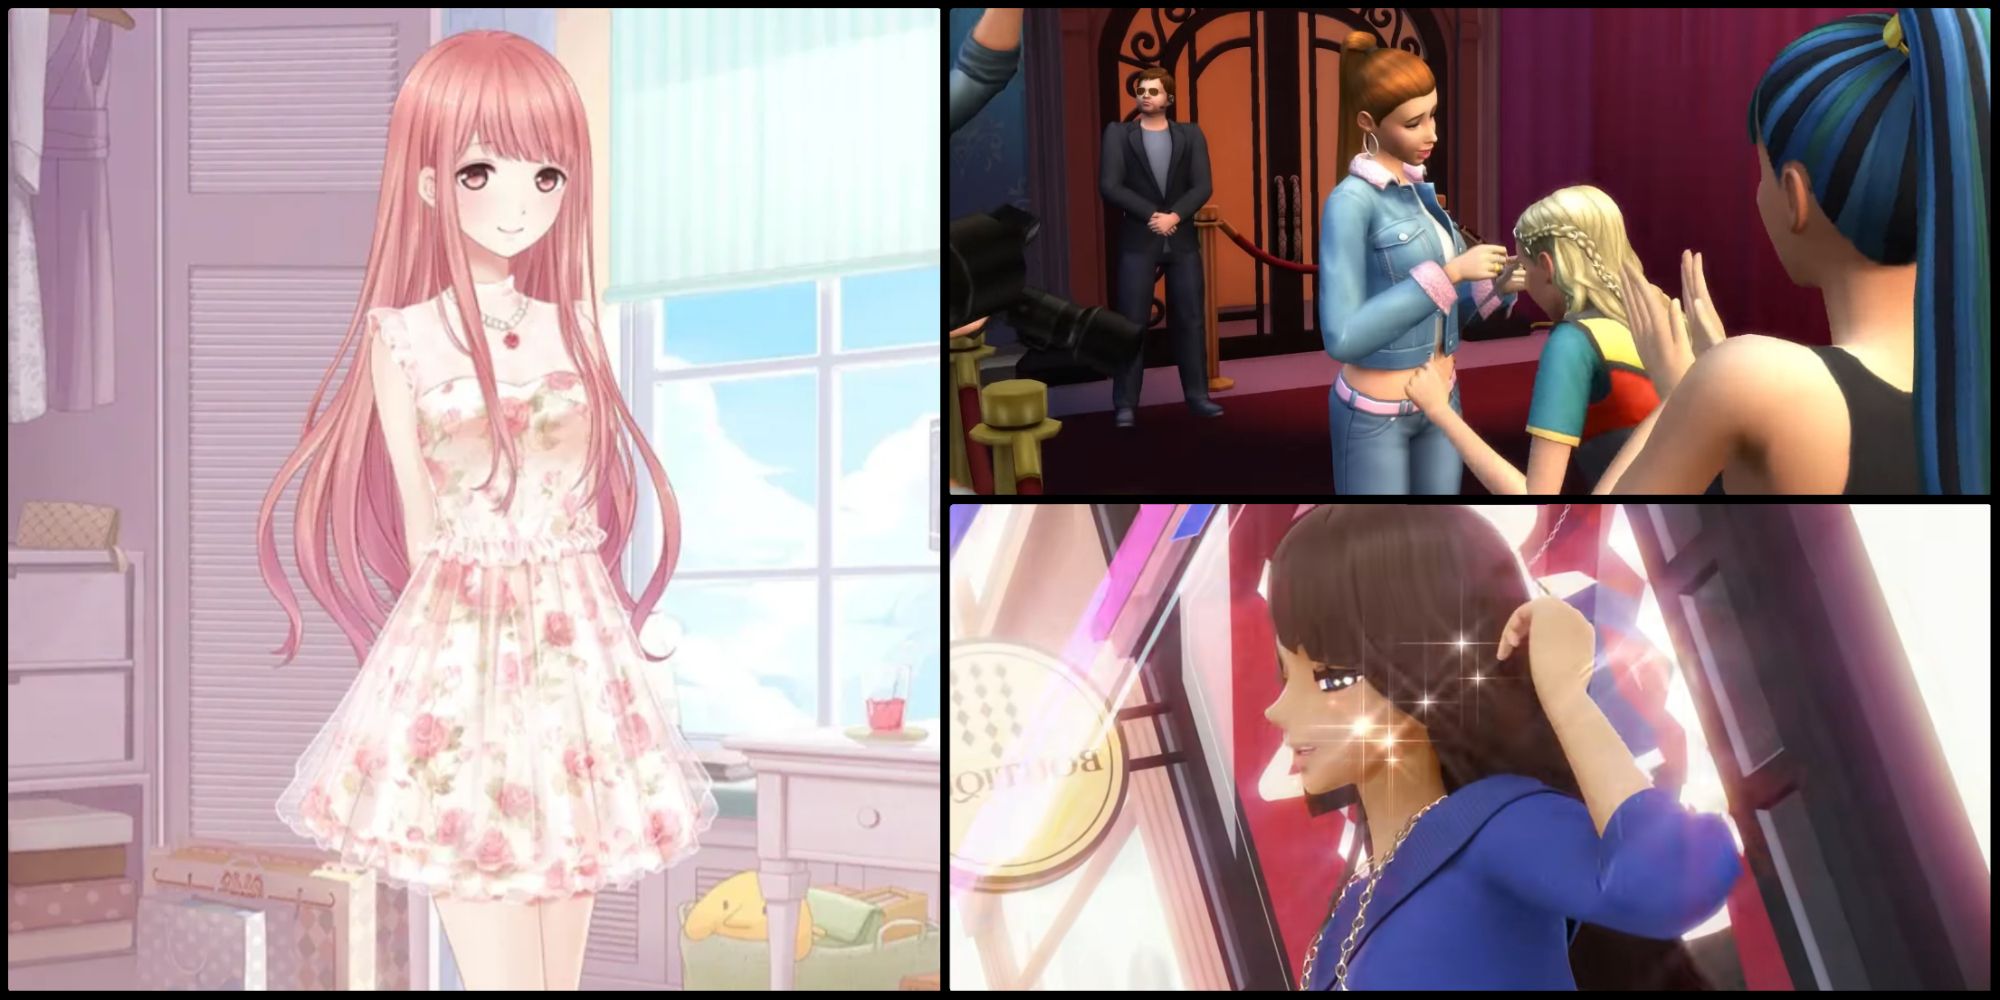 screenshots from The Sims 4, Love Nikki Dress UP Queen and Style Savvy: Styling Star